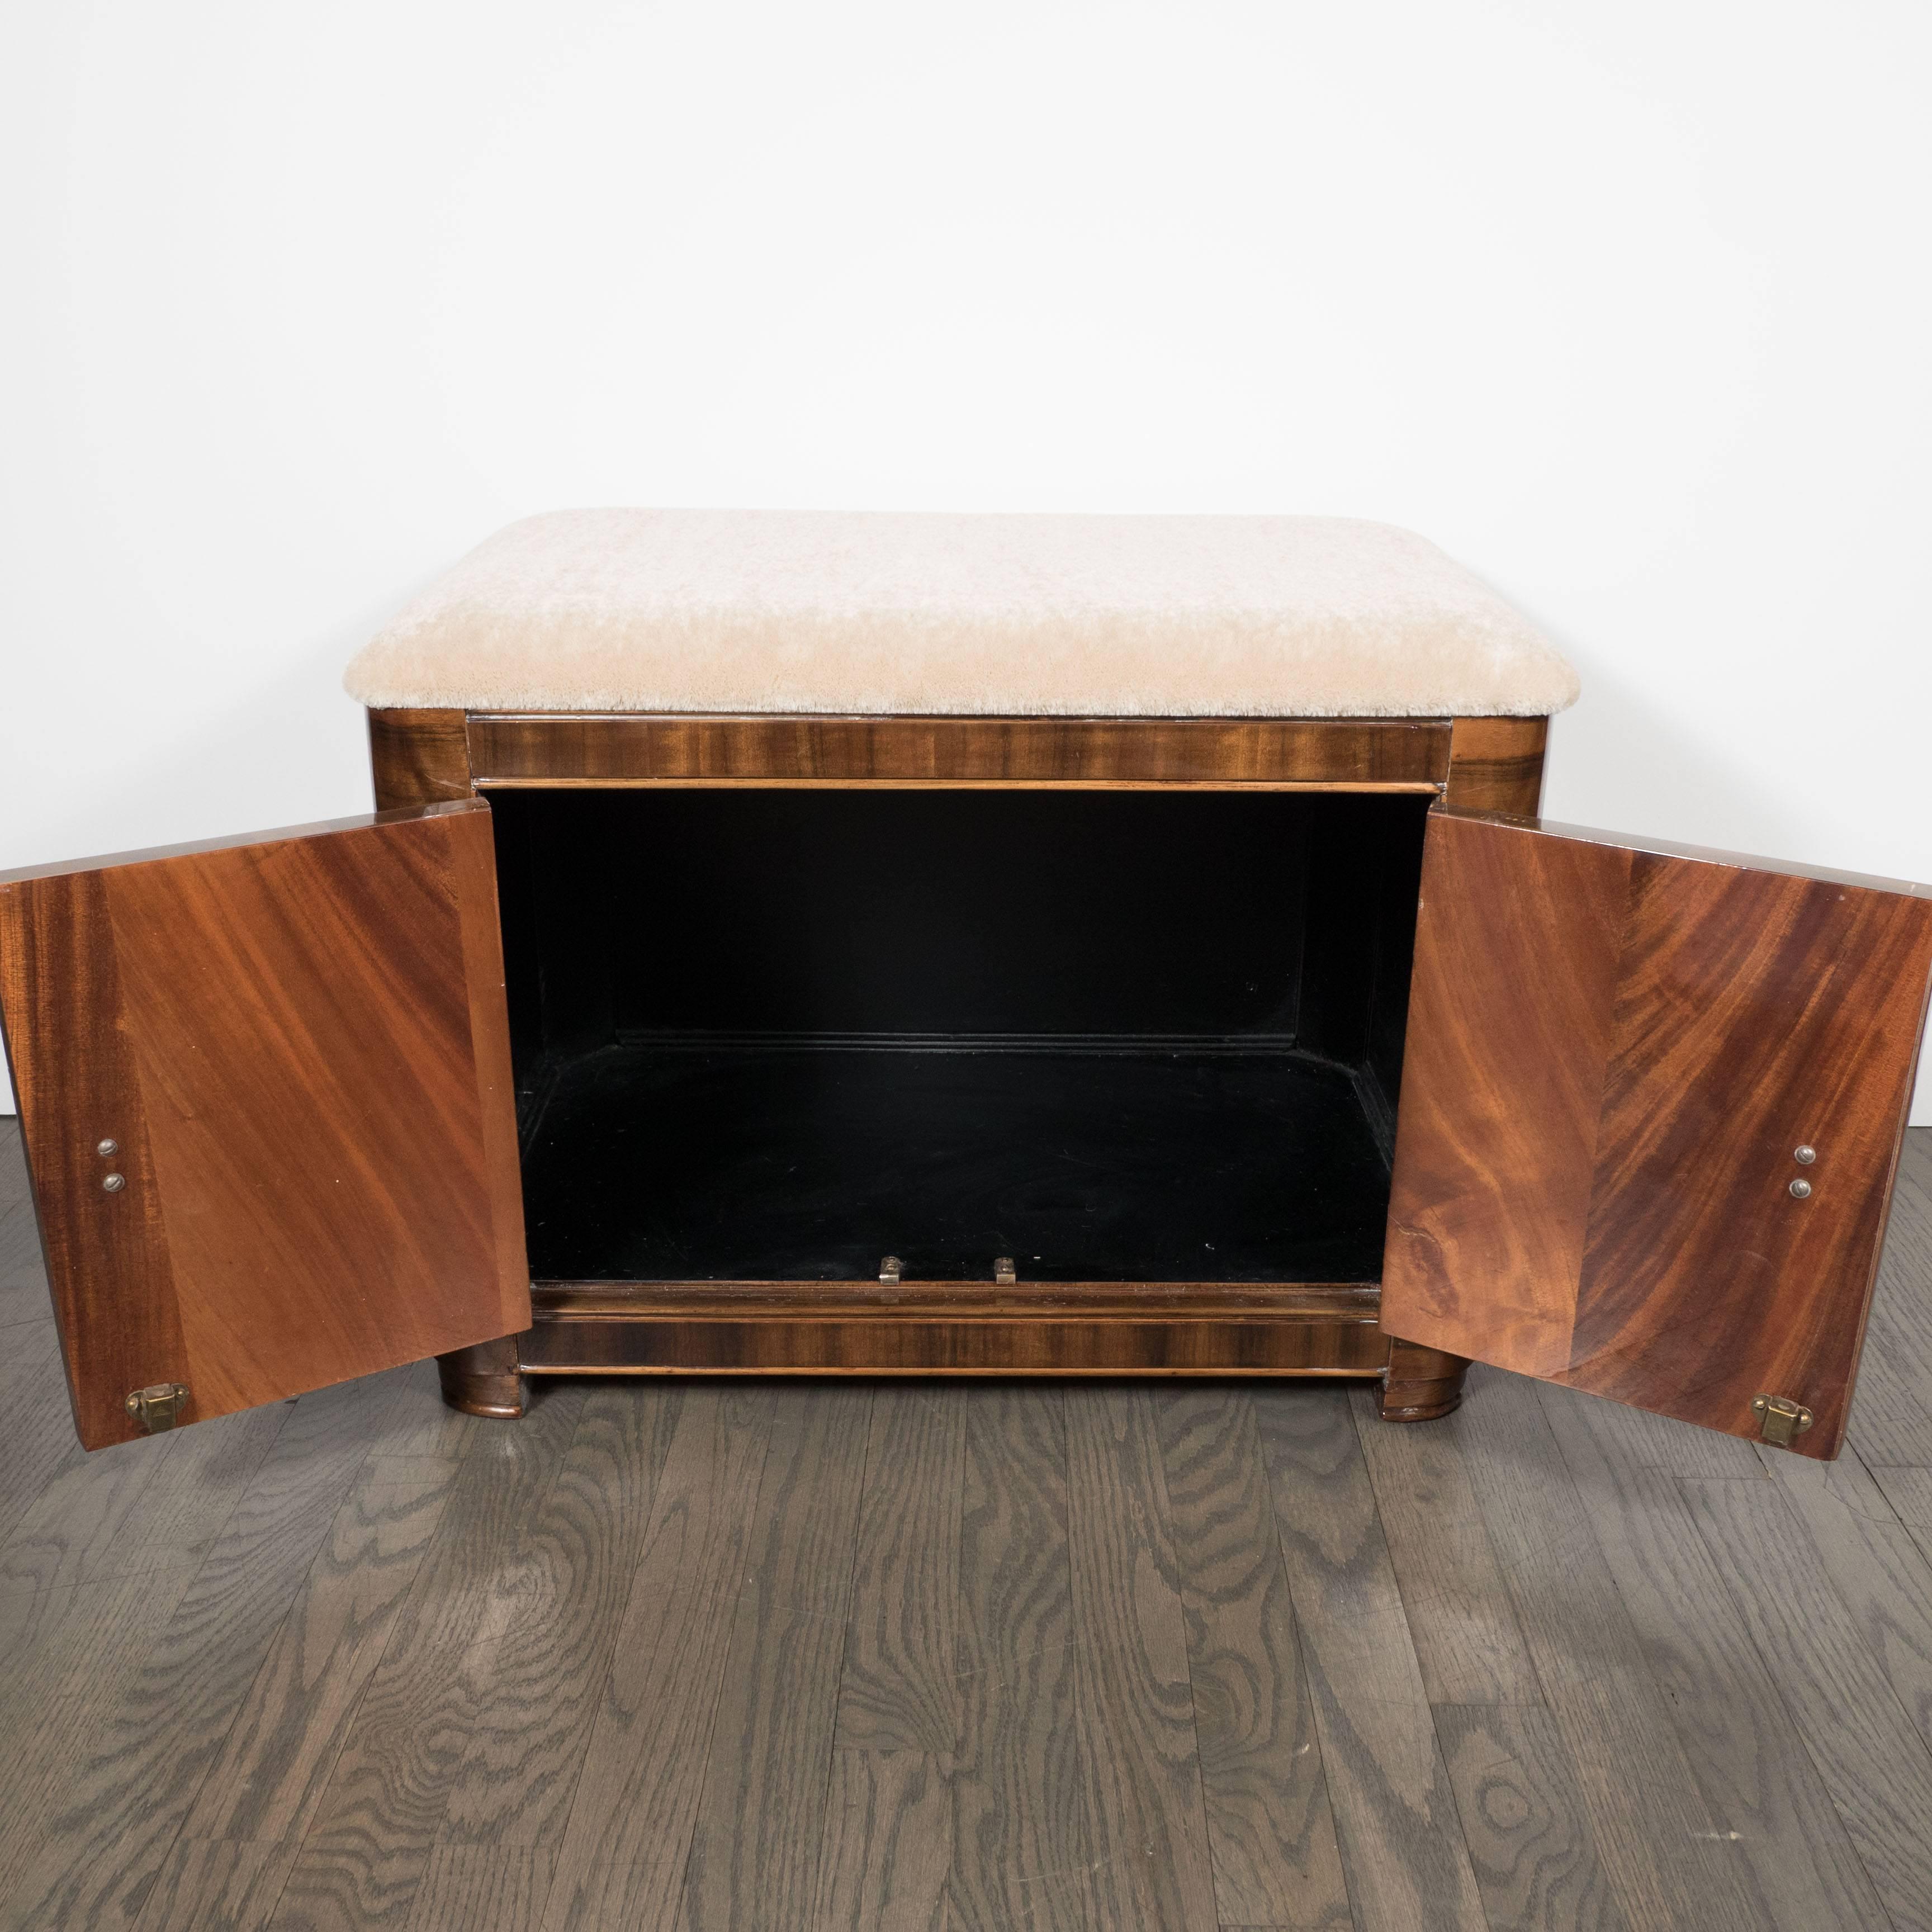 An Art Deco Machine Age storage bench in bookmatched walnut with original Bakelite and brass pulls. A newly upholstered seat or foot rest in luxe camel mohair top a bookmatched base. A pair of center-handled doors open to reveal ample storage. A